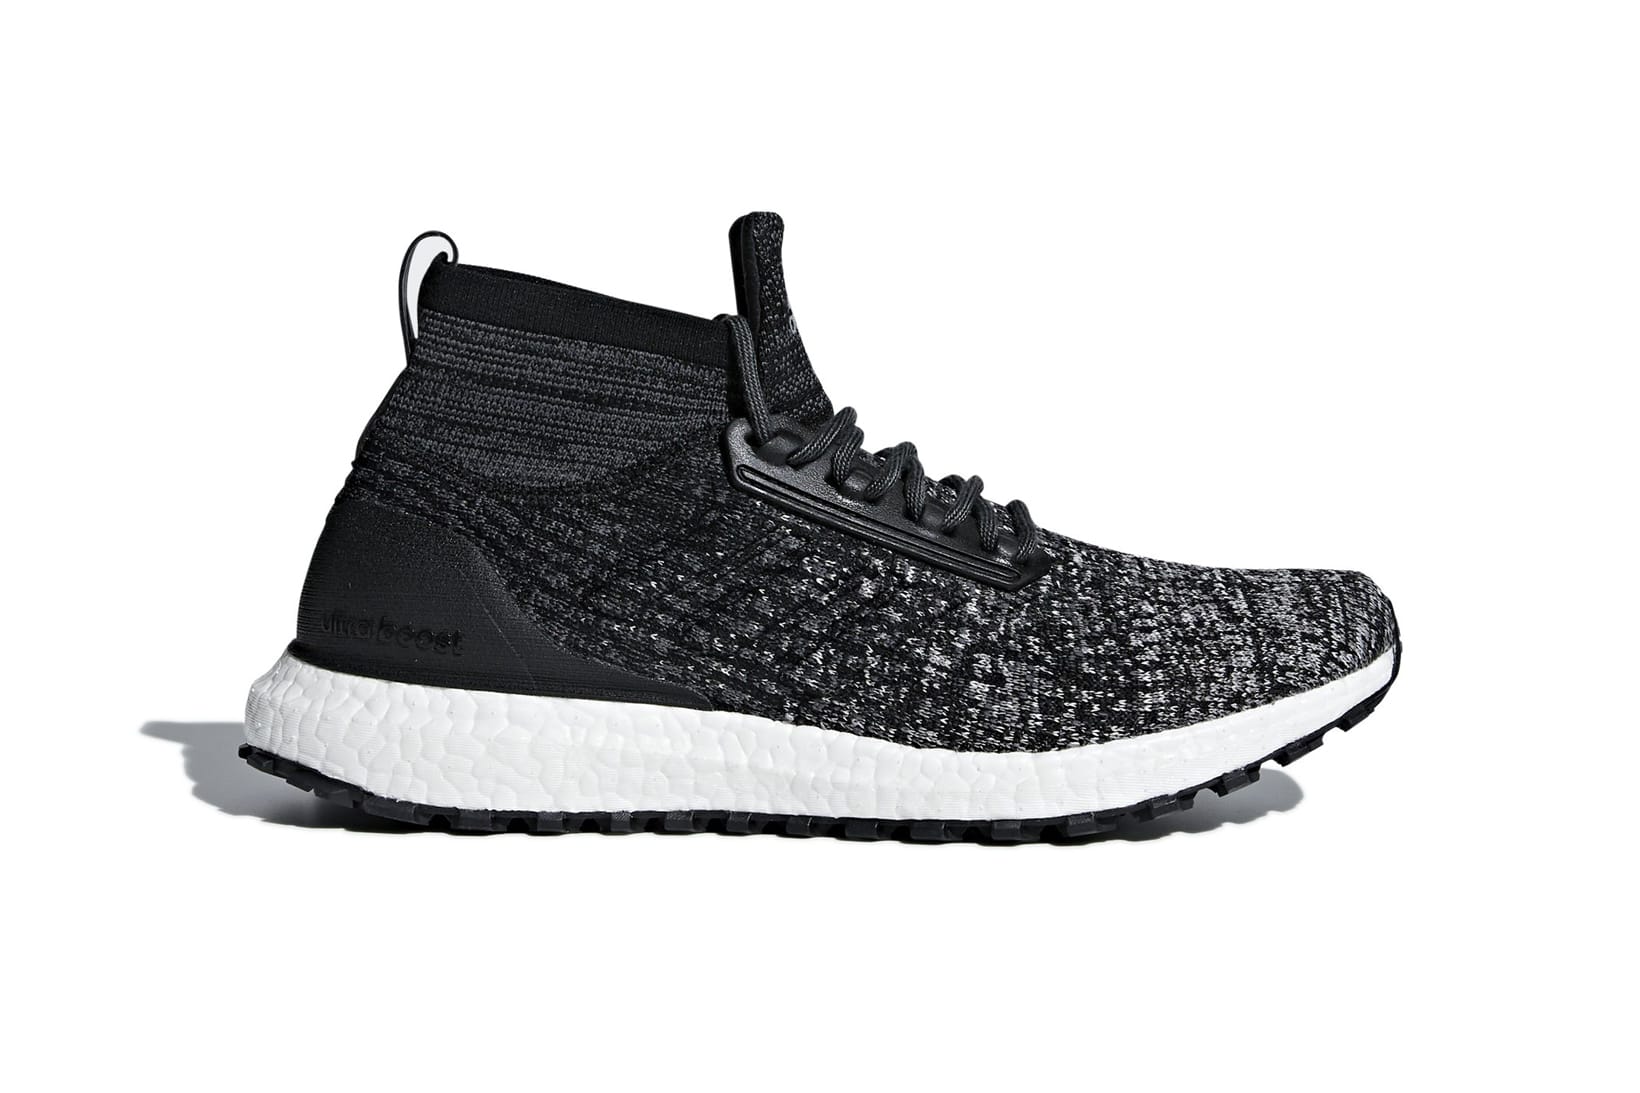 adidas x Reigning Champ UltraBOOST Mid 